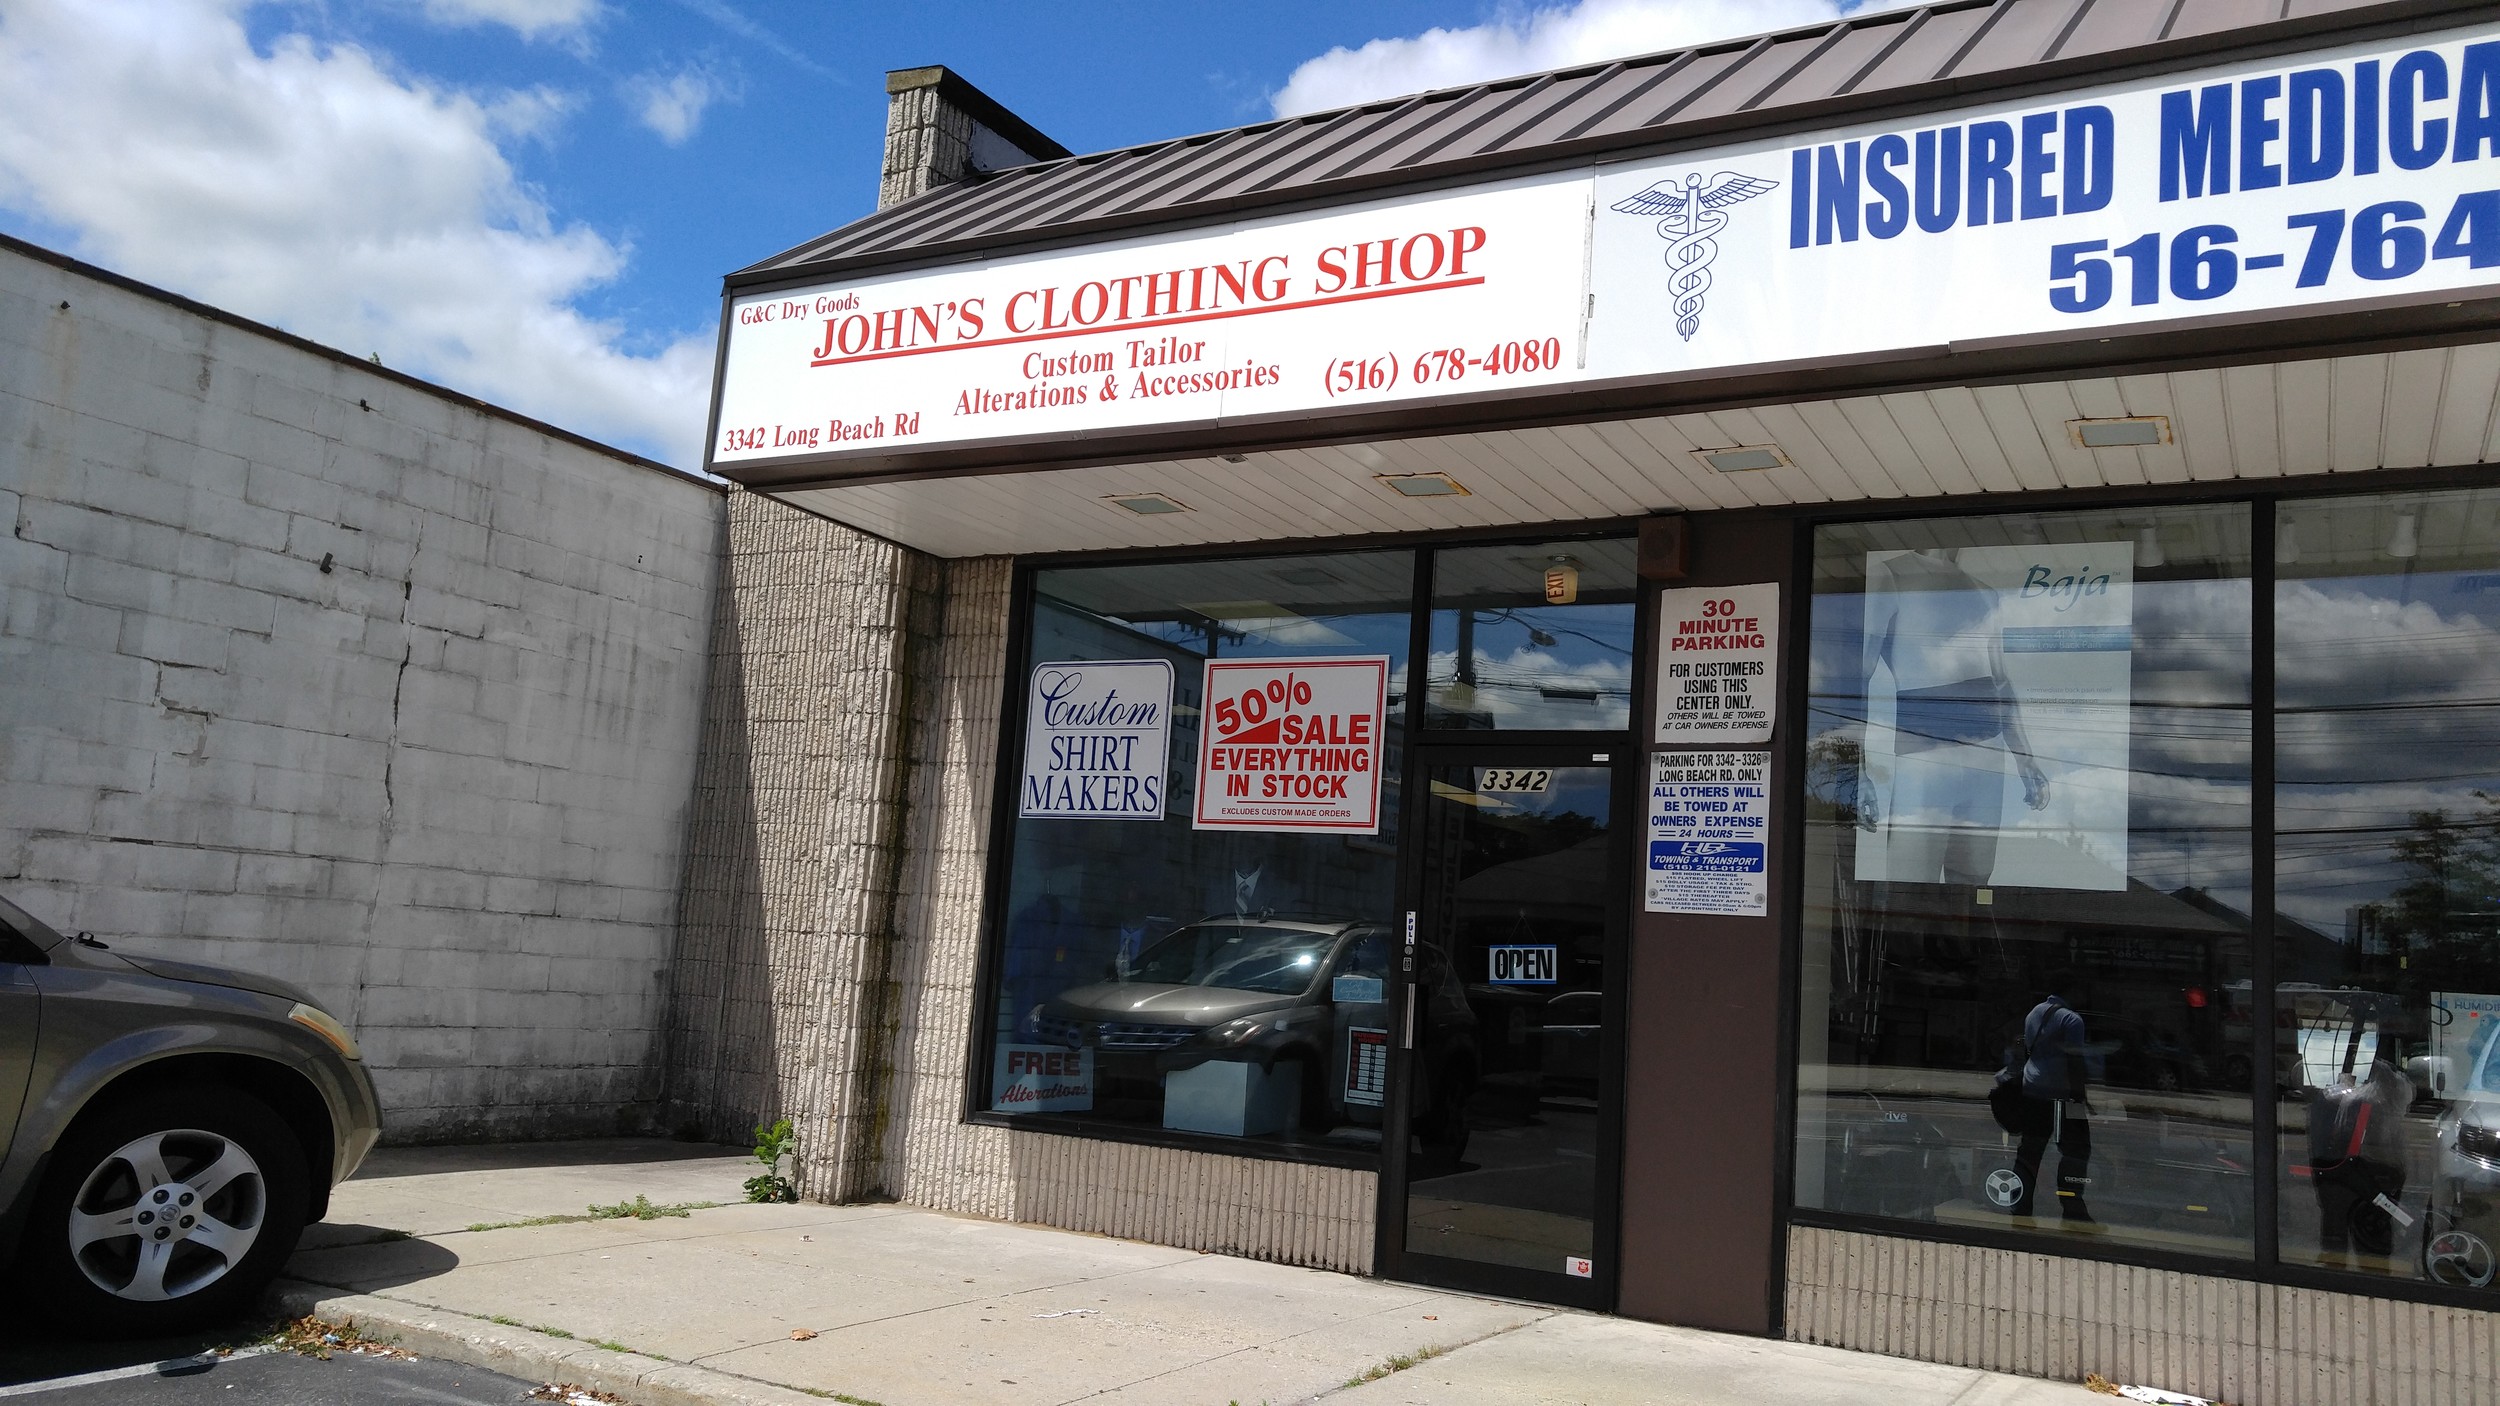 The temporary location for John’s Clothing Shop.